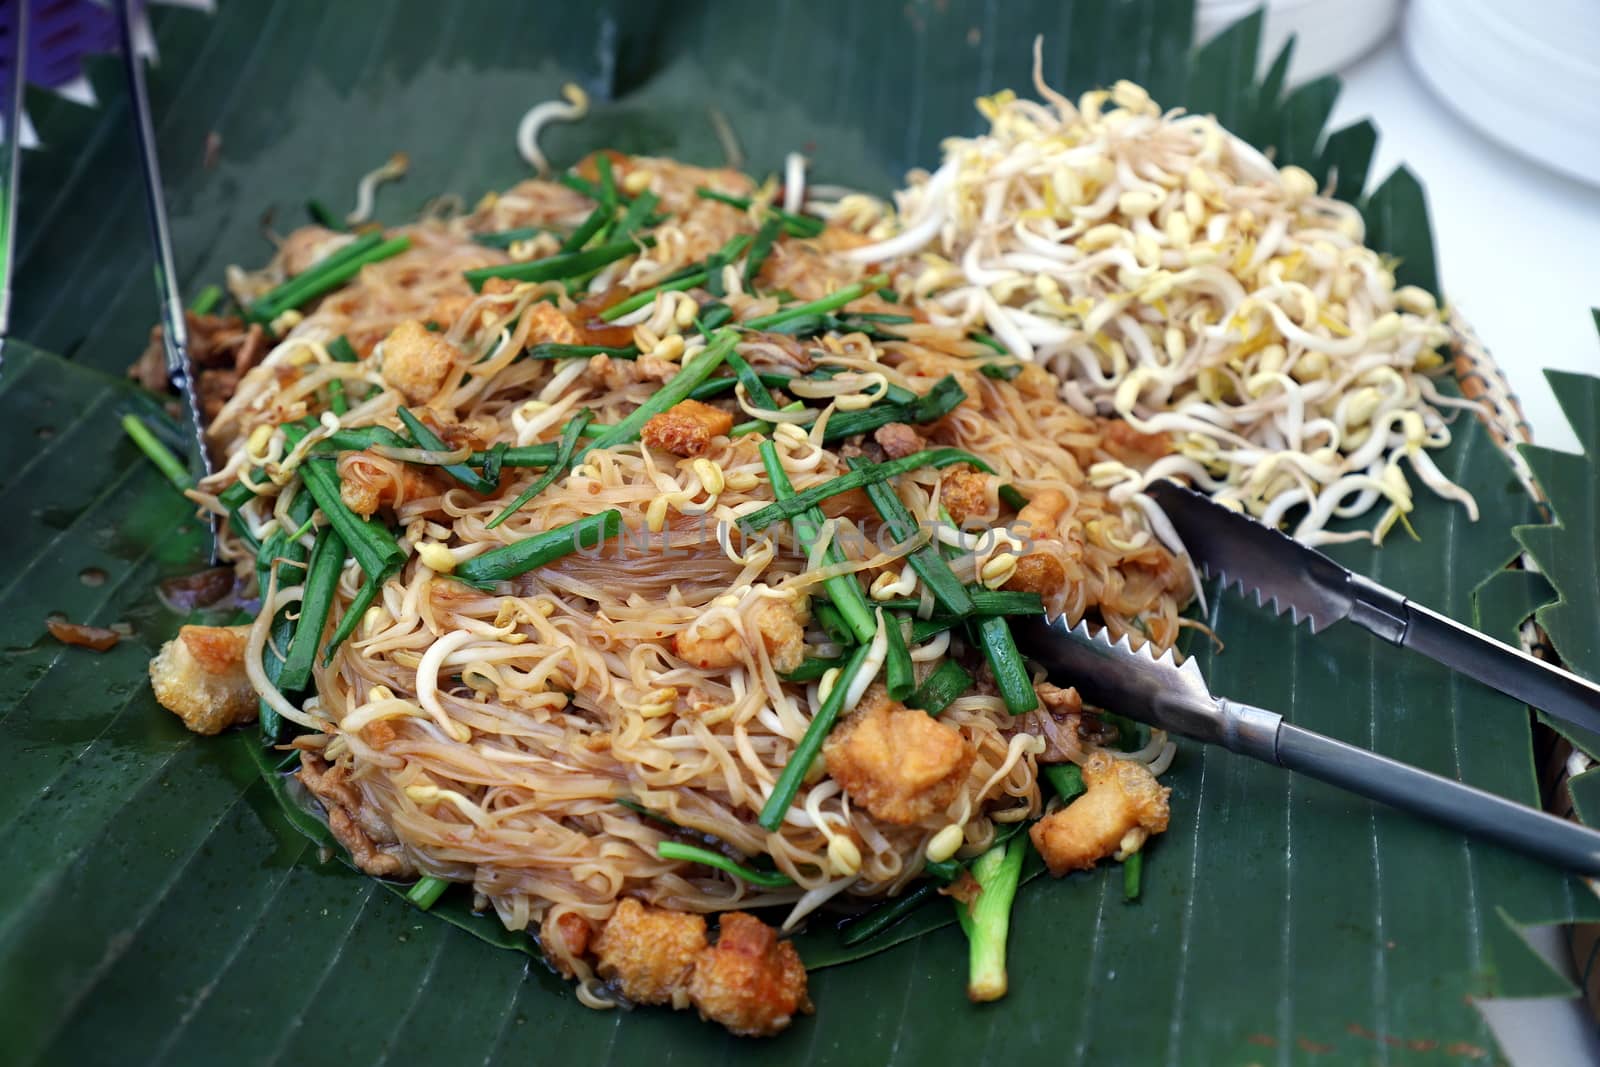 Korat Pad Mee is a local dish from Nakhon Ratchasima, Thailand, looks similar to Pad Thai in the central region on banana leaves, with a stainless steel tongs placed next to it. Selective focus.